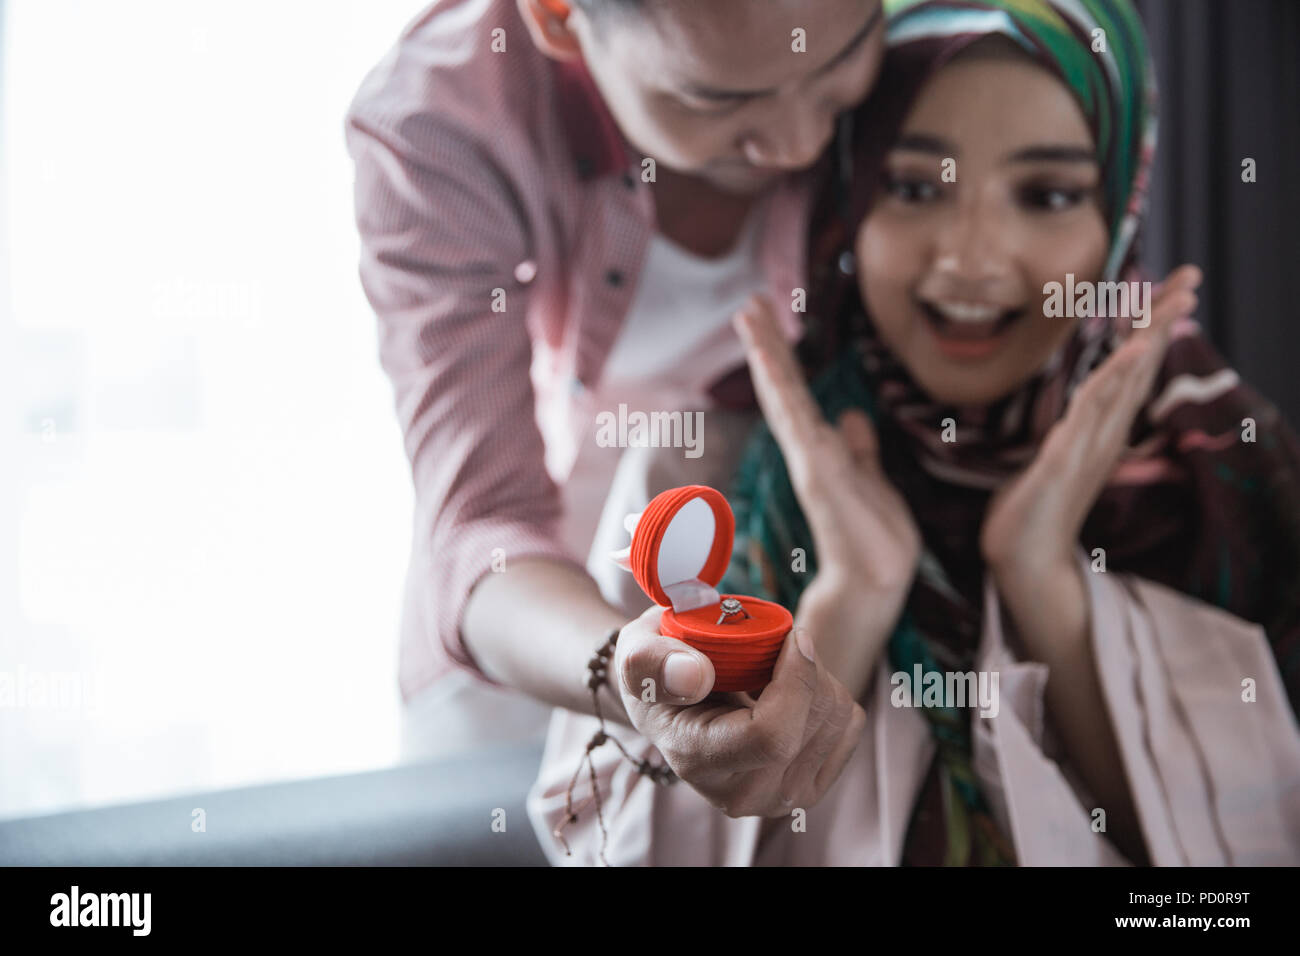 muslim woman get a ring Stock Photo